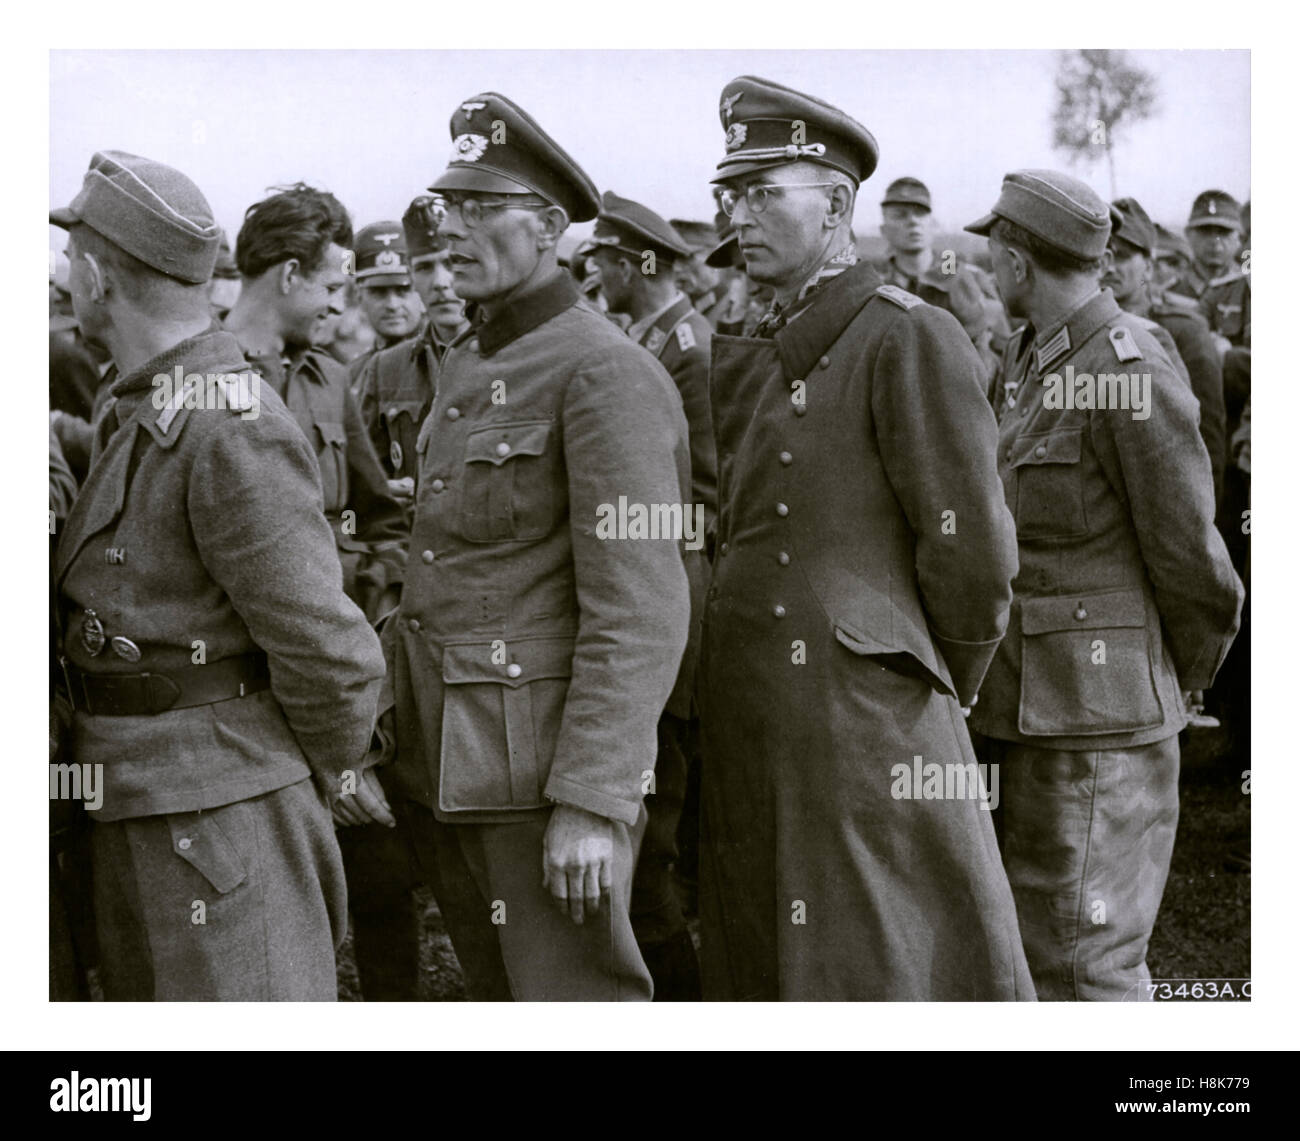 WW2 German prisoners of war, Wehrmacht and enlisted men in uniform standing grouped together Stock Photo